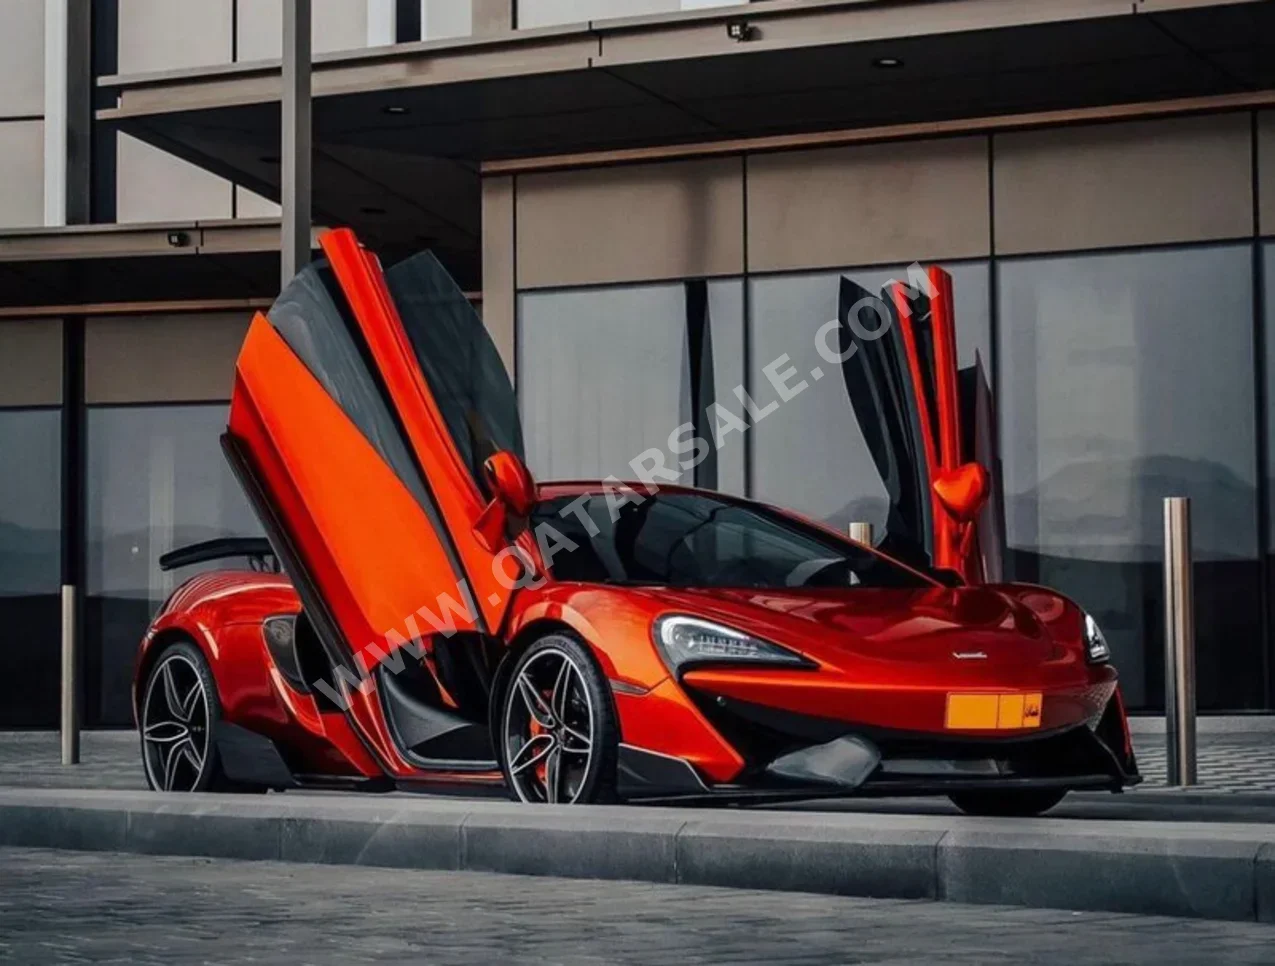 Mclaren  570  S  2017  Automatic  37,500 Km  8 Cylinder  Rear Wheel Drive (RWD)  Coupe / Sport  Black and Orange